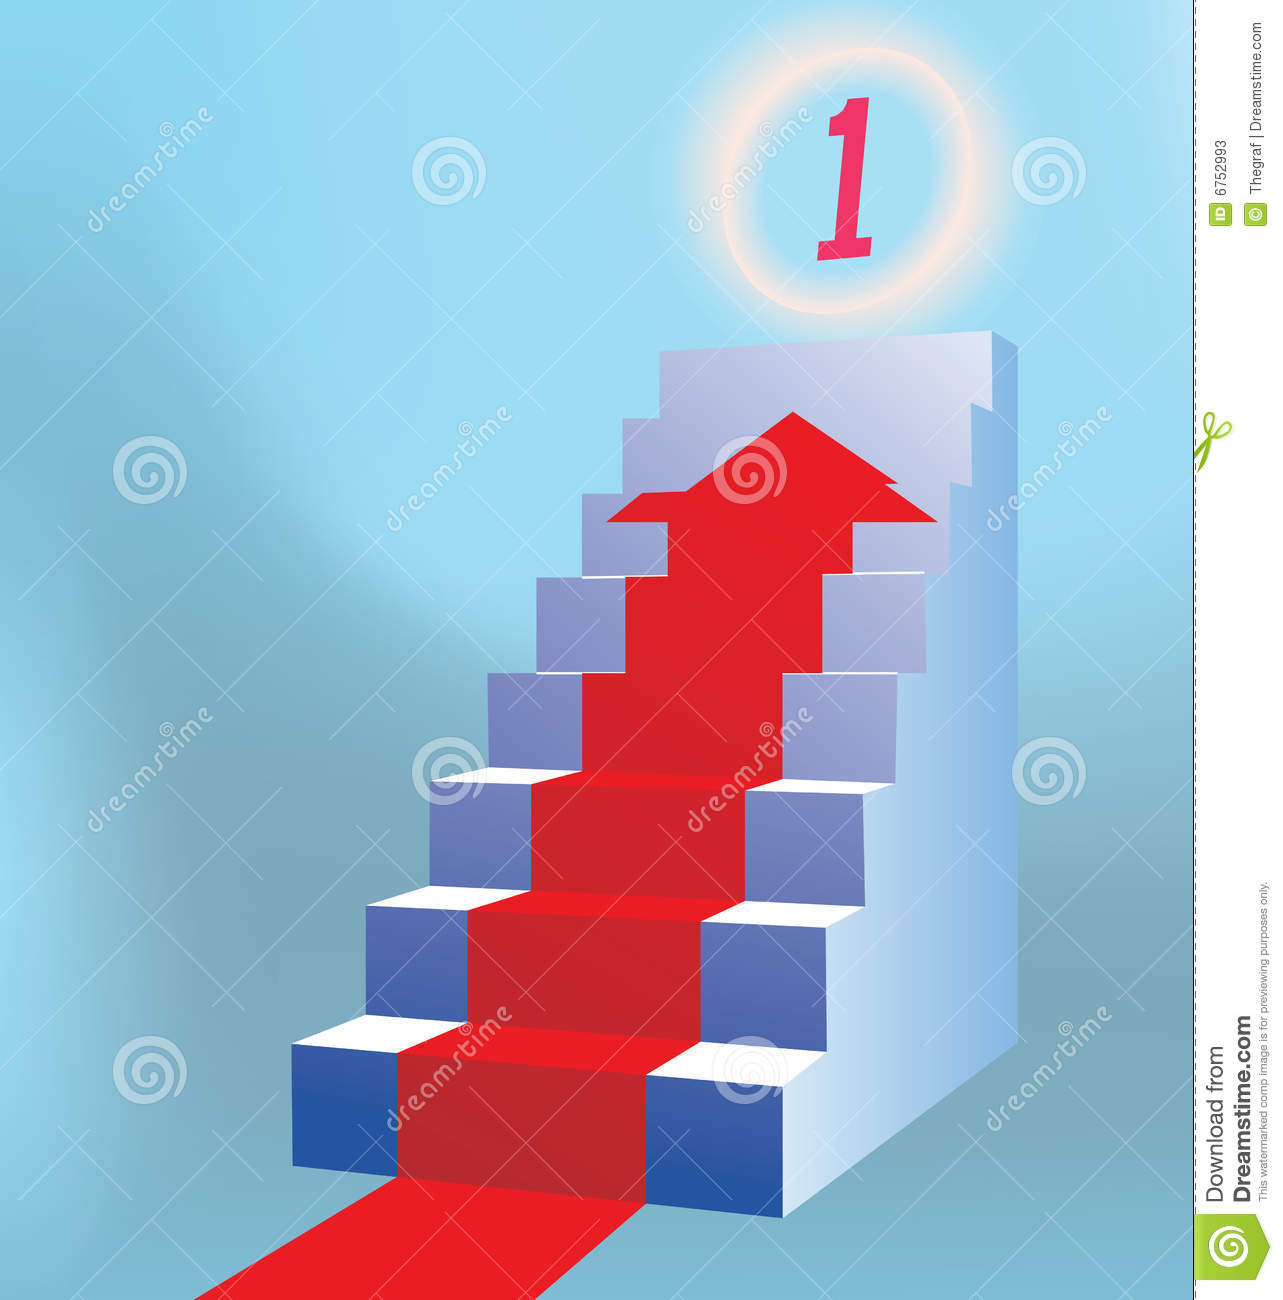 11 Top Stairs To Success Vector Images - Zig Ziglar See You at the Top